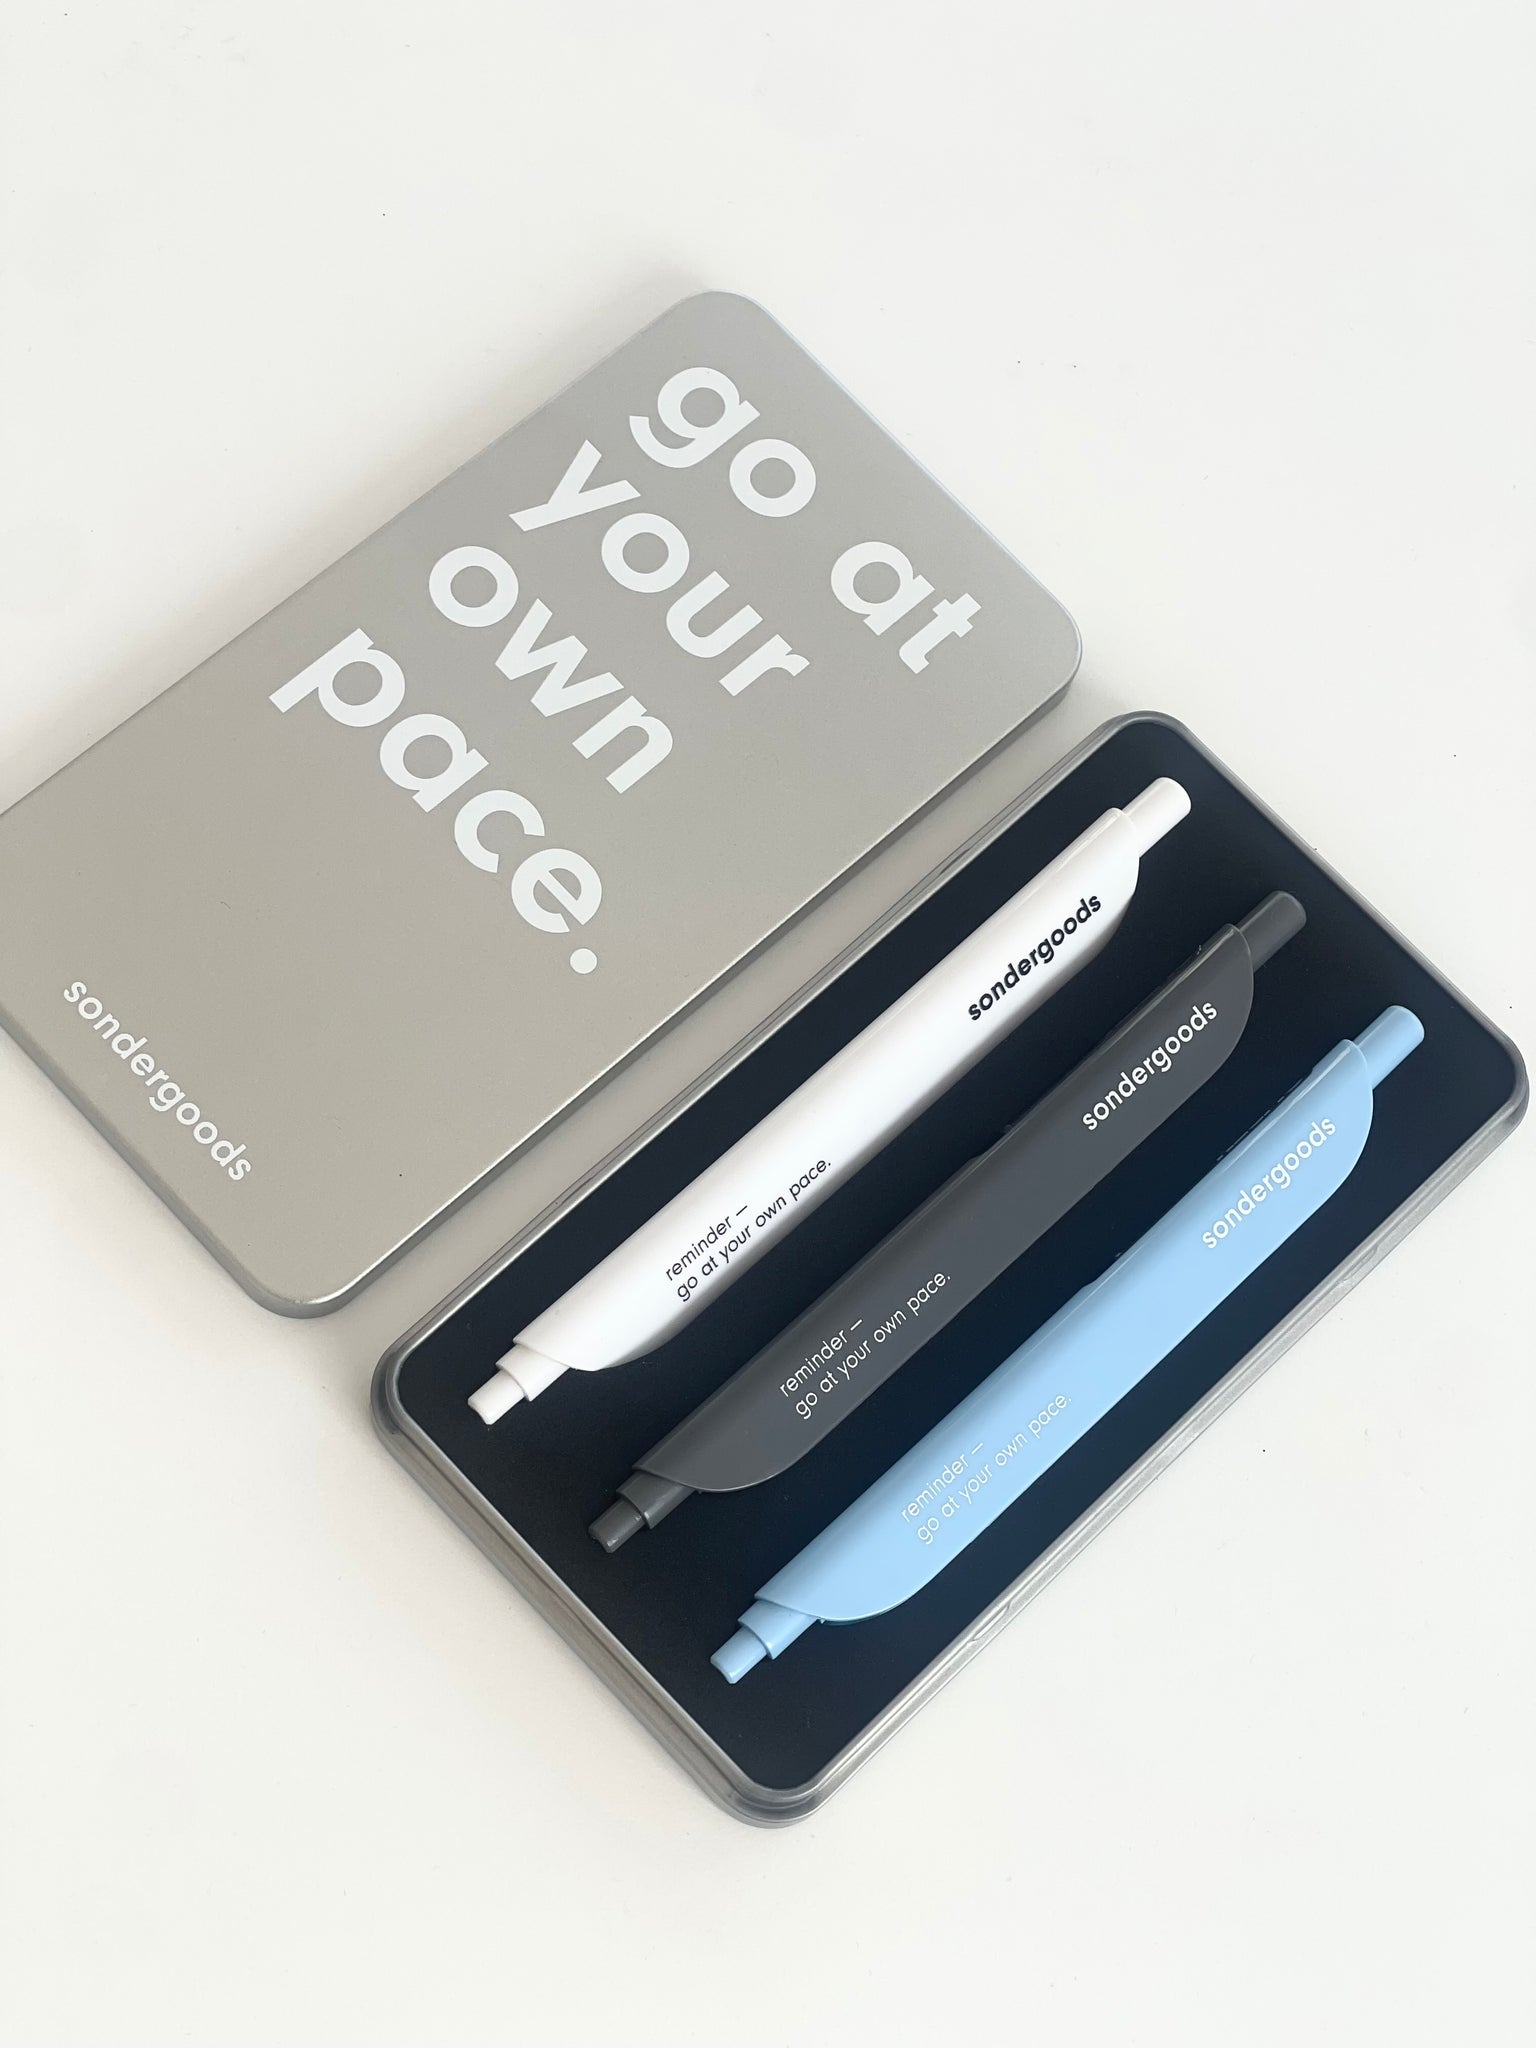 "Go At Your Own Pace" Pen Set